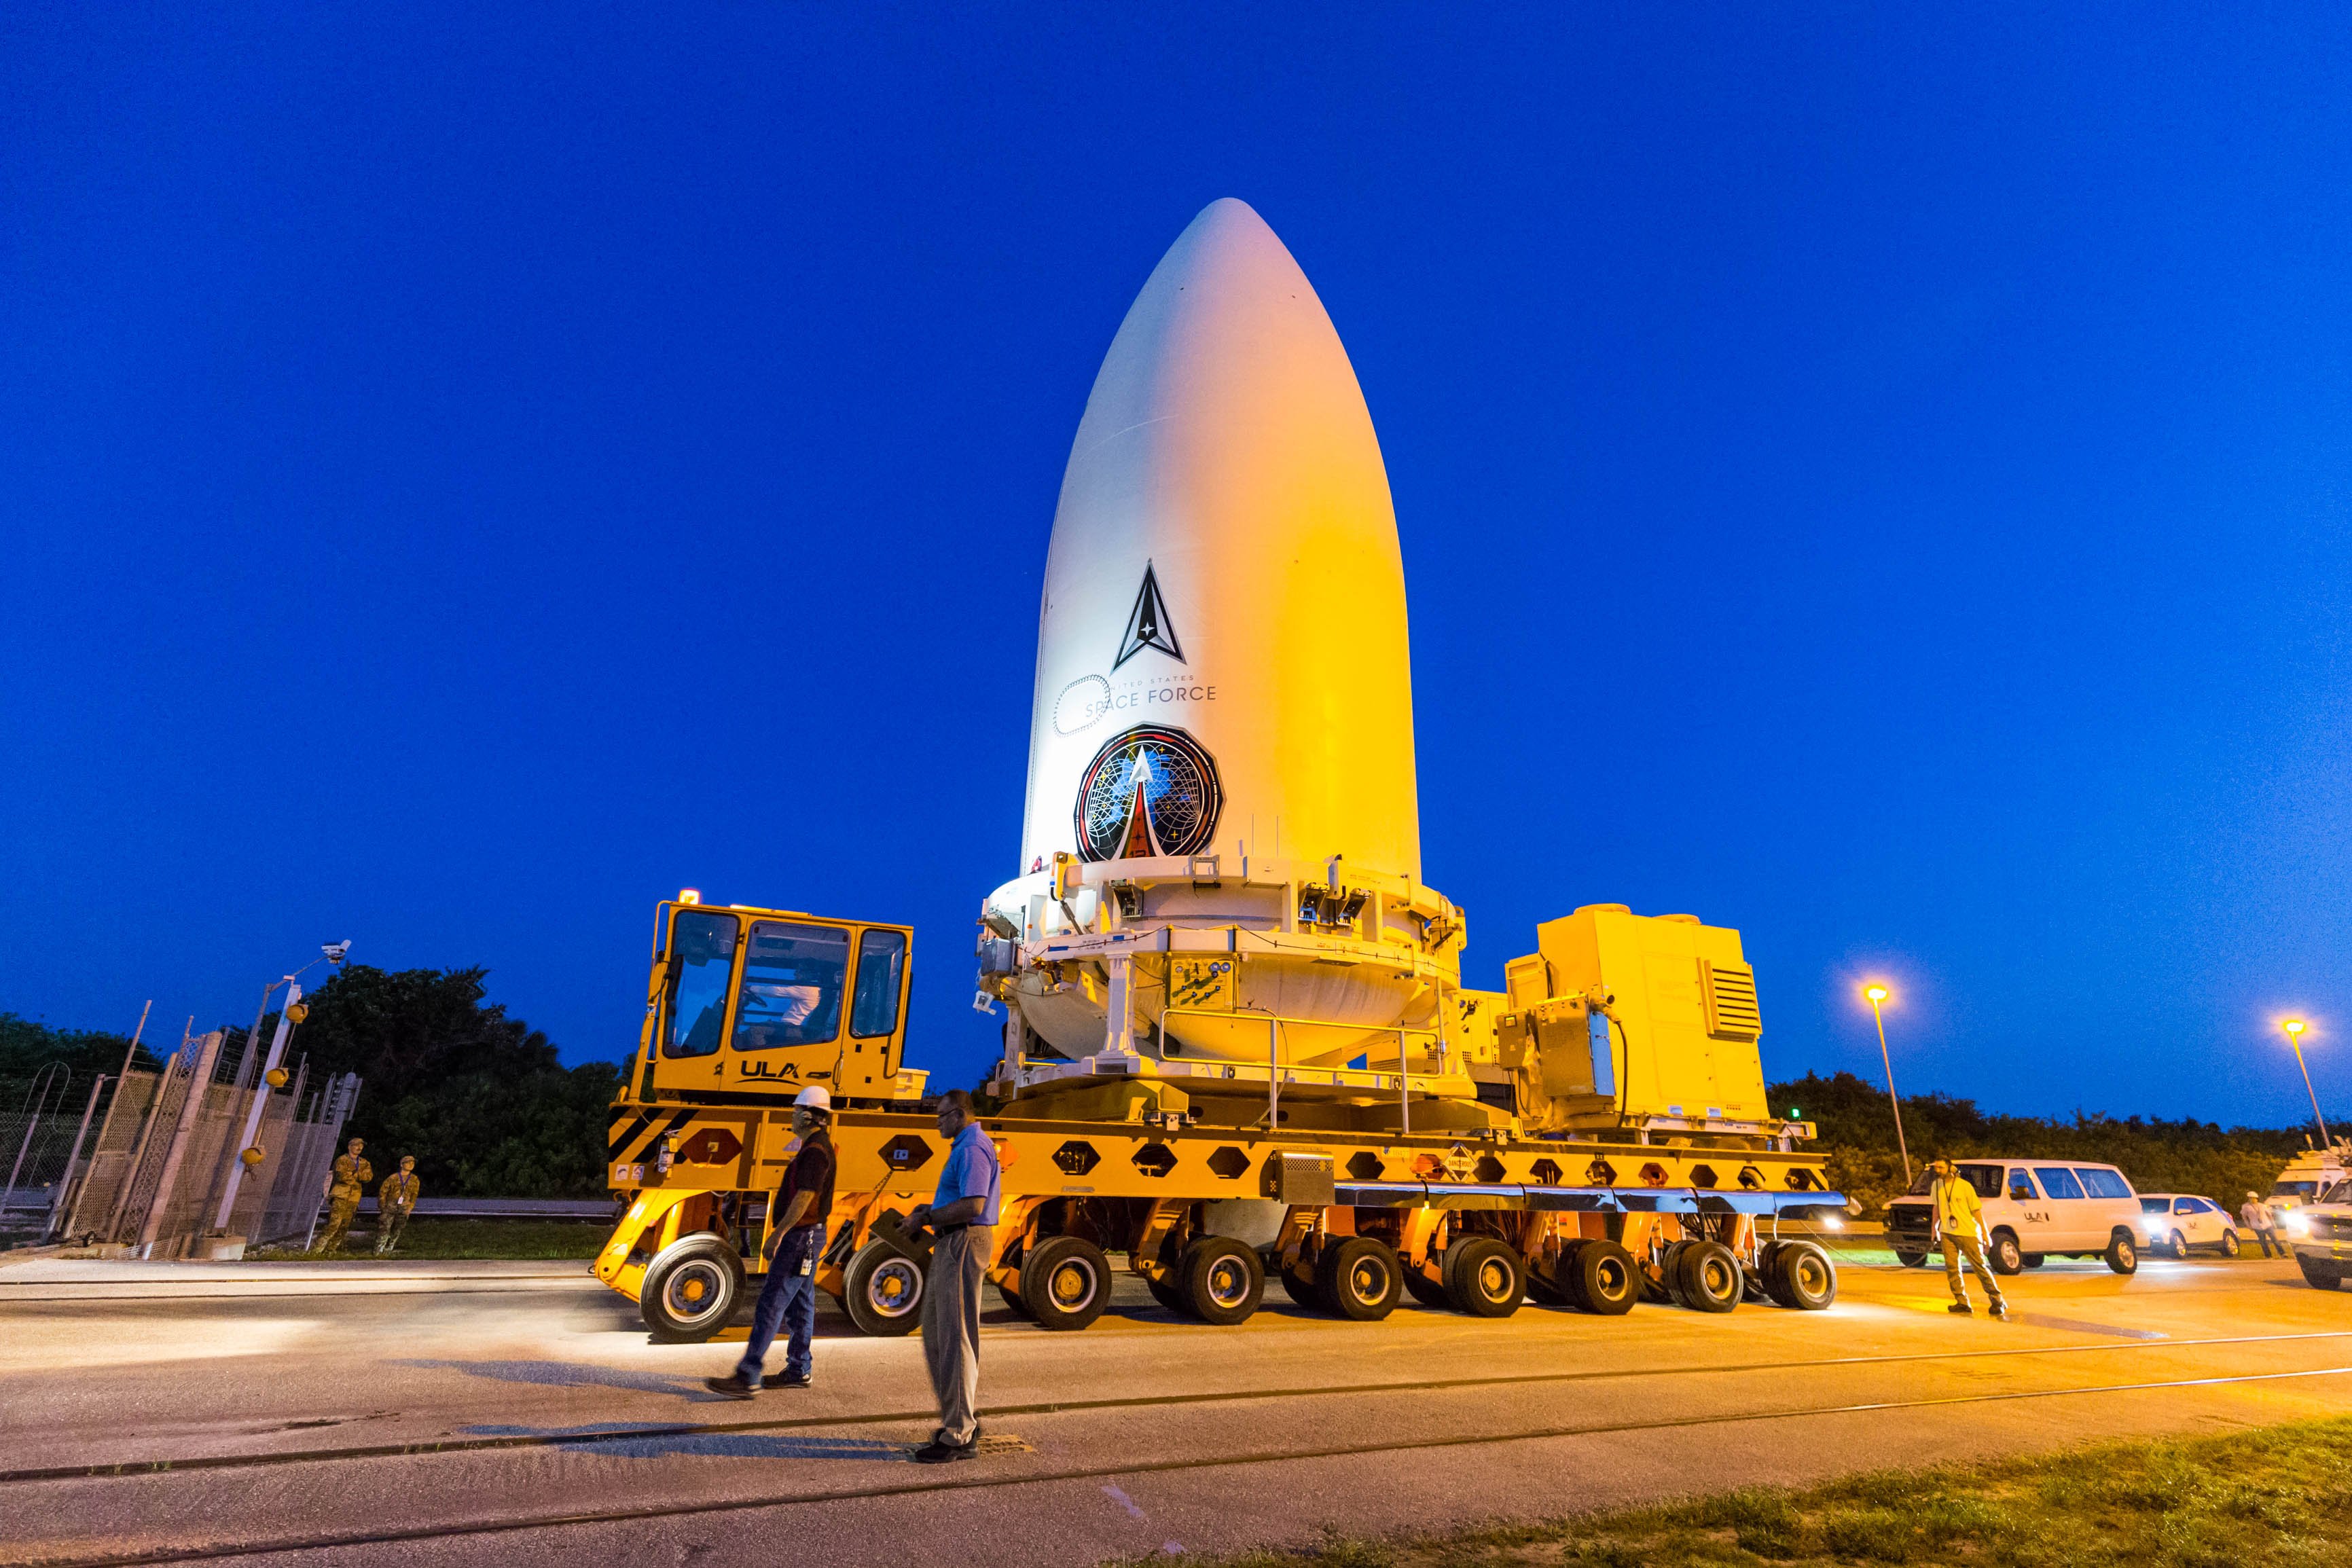 USSF-12 arrives at the VIF. Photo by United Launch Alliance